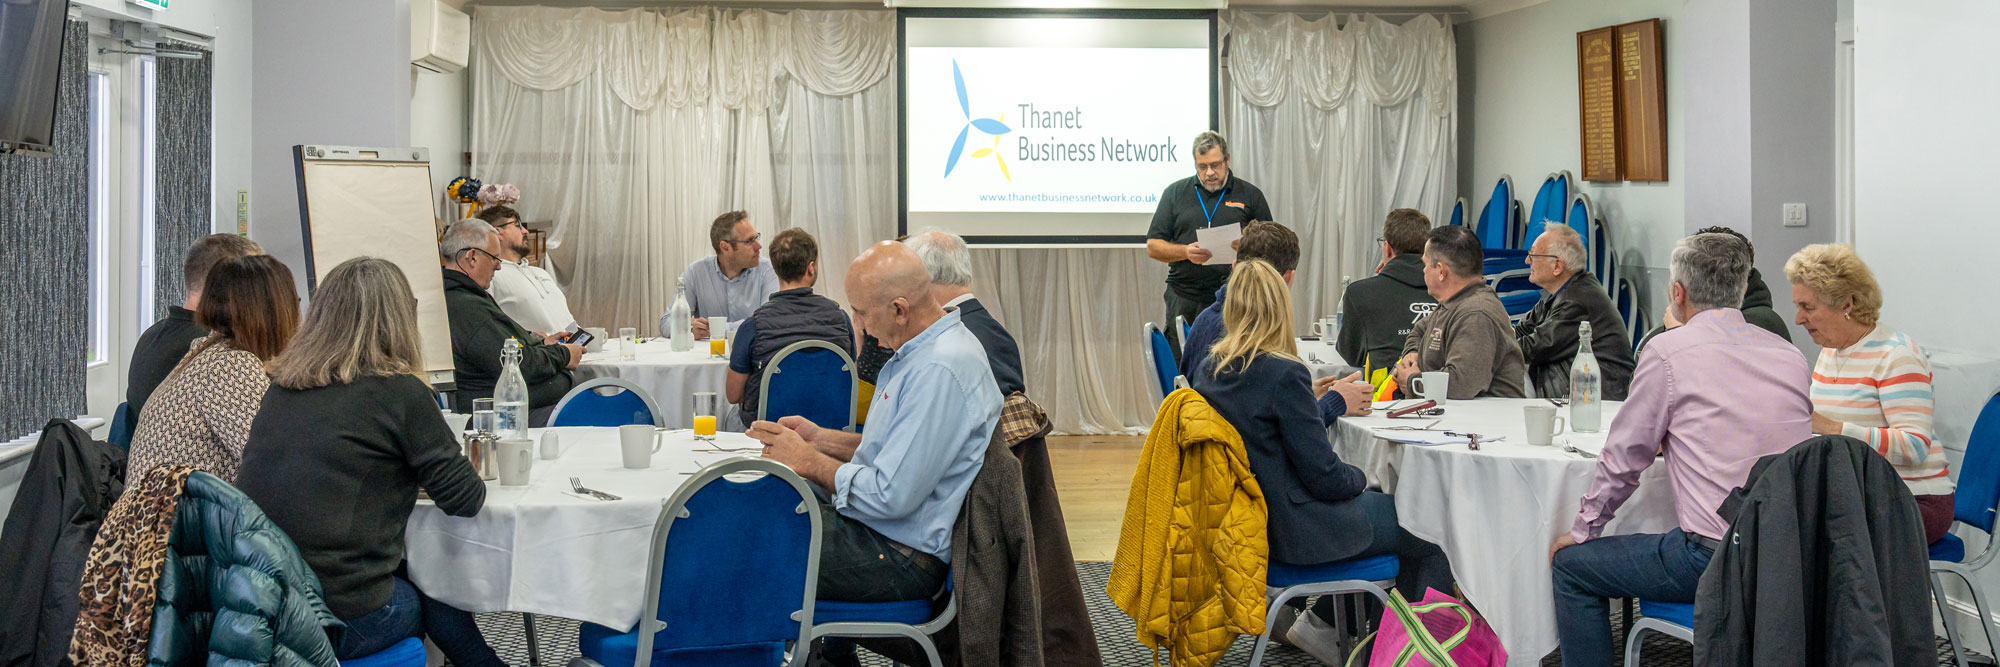 Thanet Business Network meeting